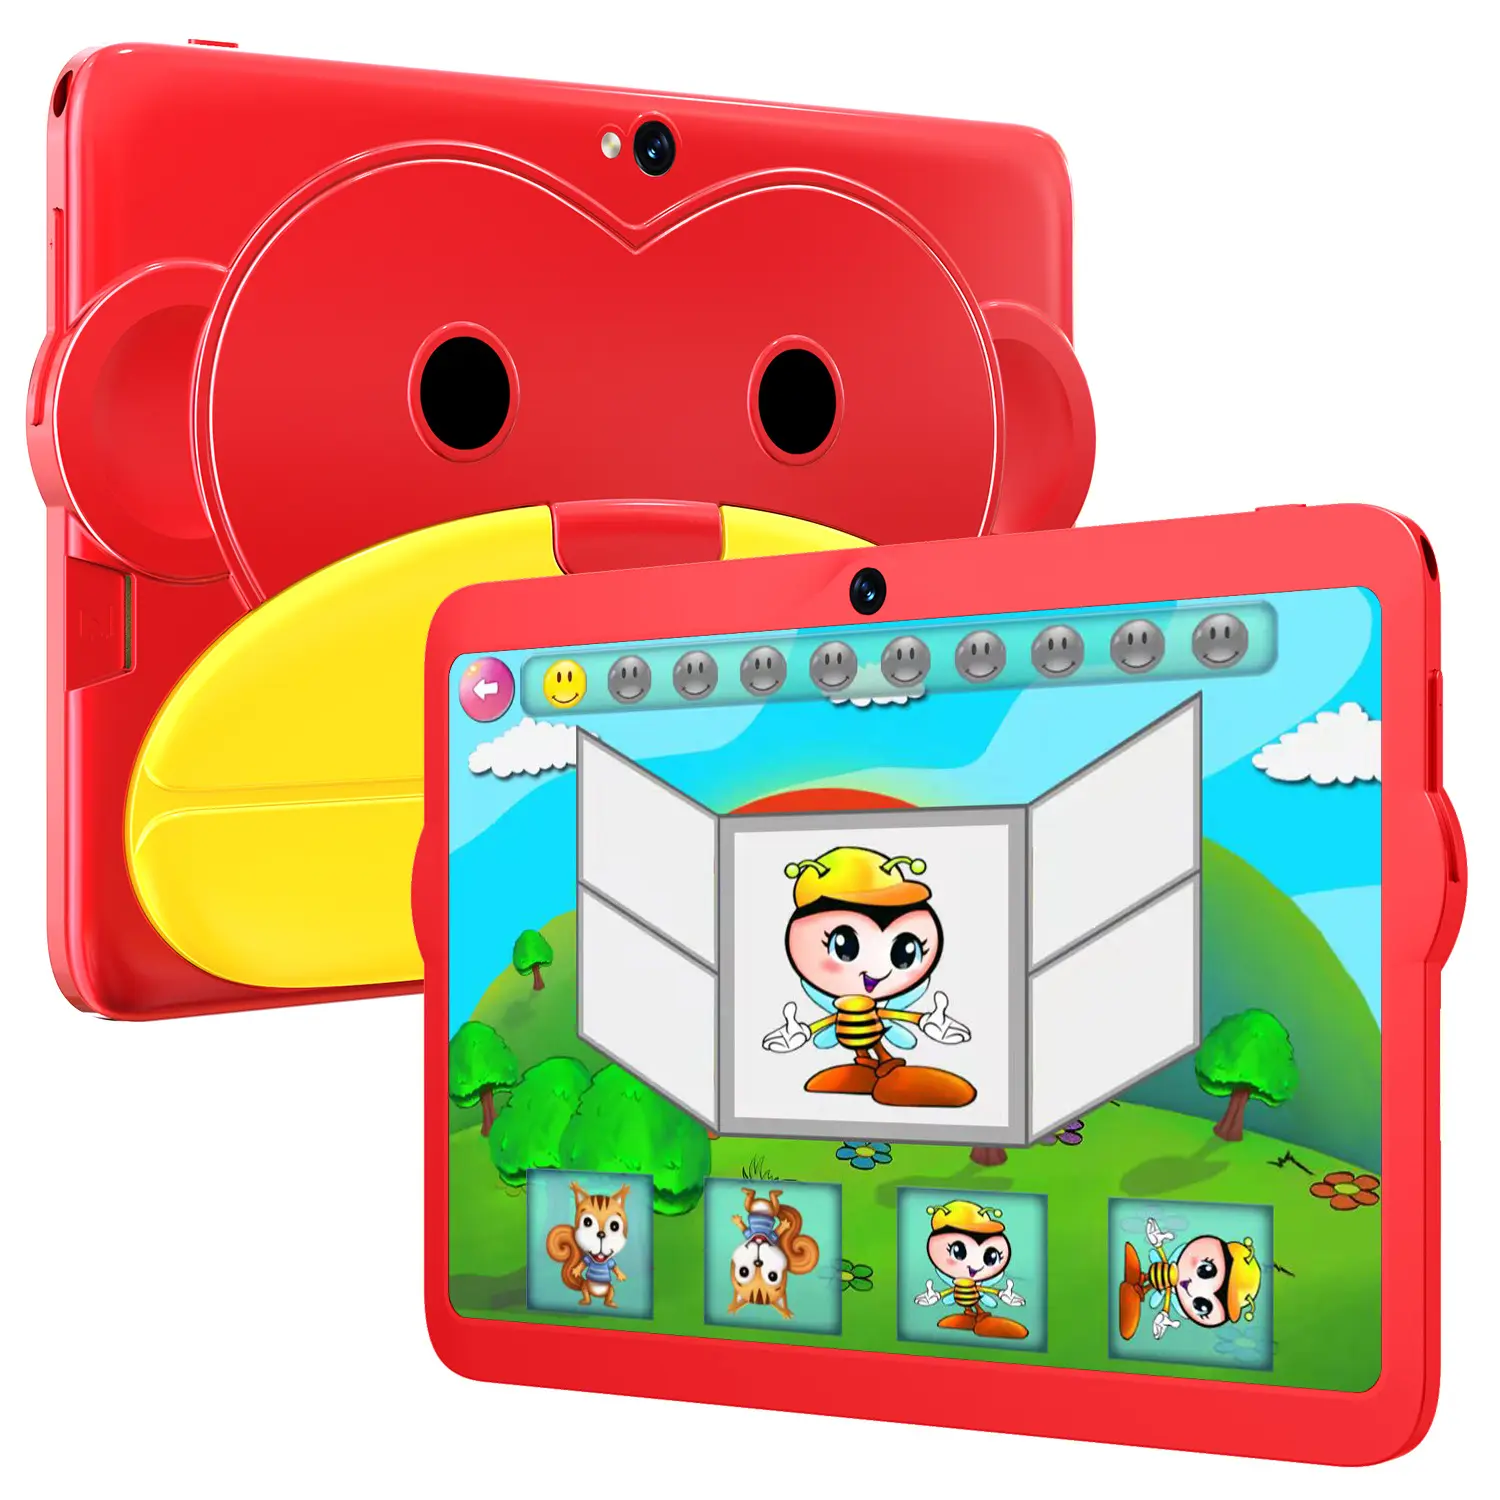 Q8C2 Wholesale OEM Android Tablet 7 Inch Smart Pad Touch Screen Android Panel PC Music Cartoon Film Learning Children Tablet PC